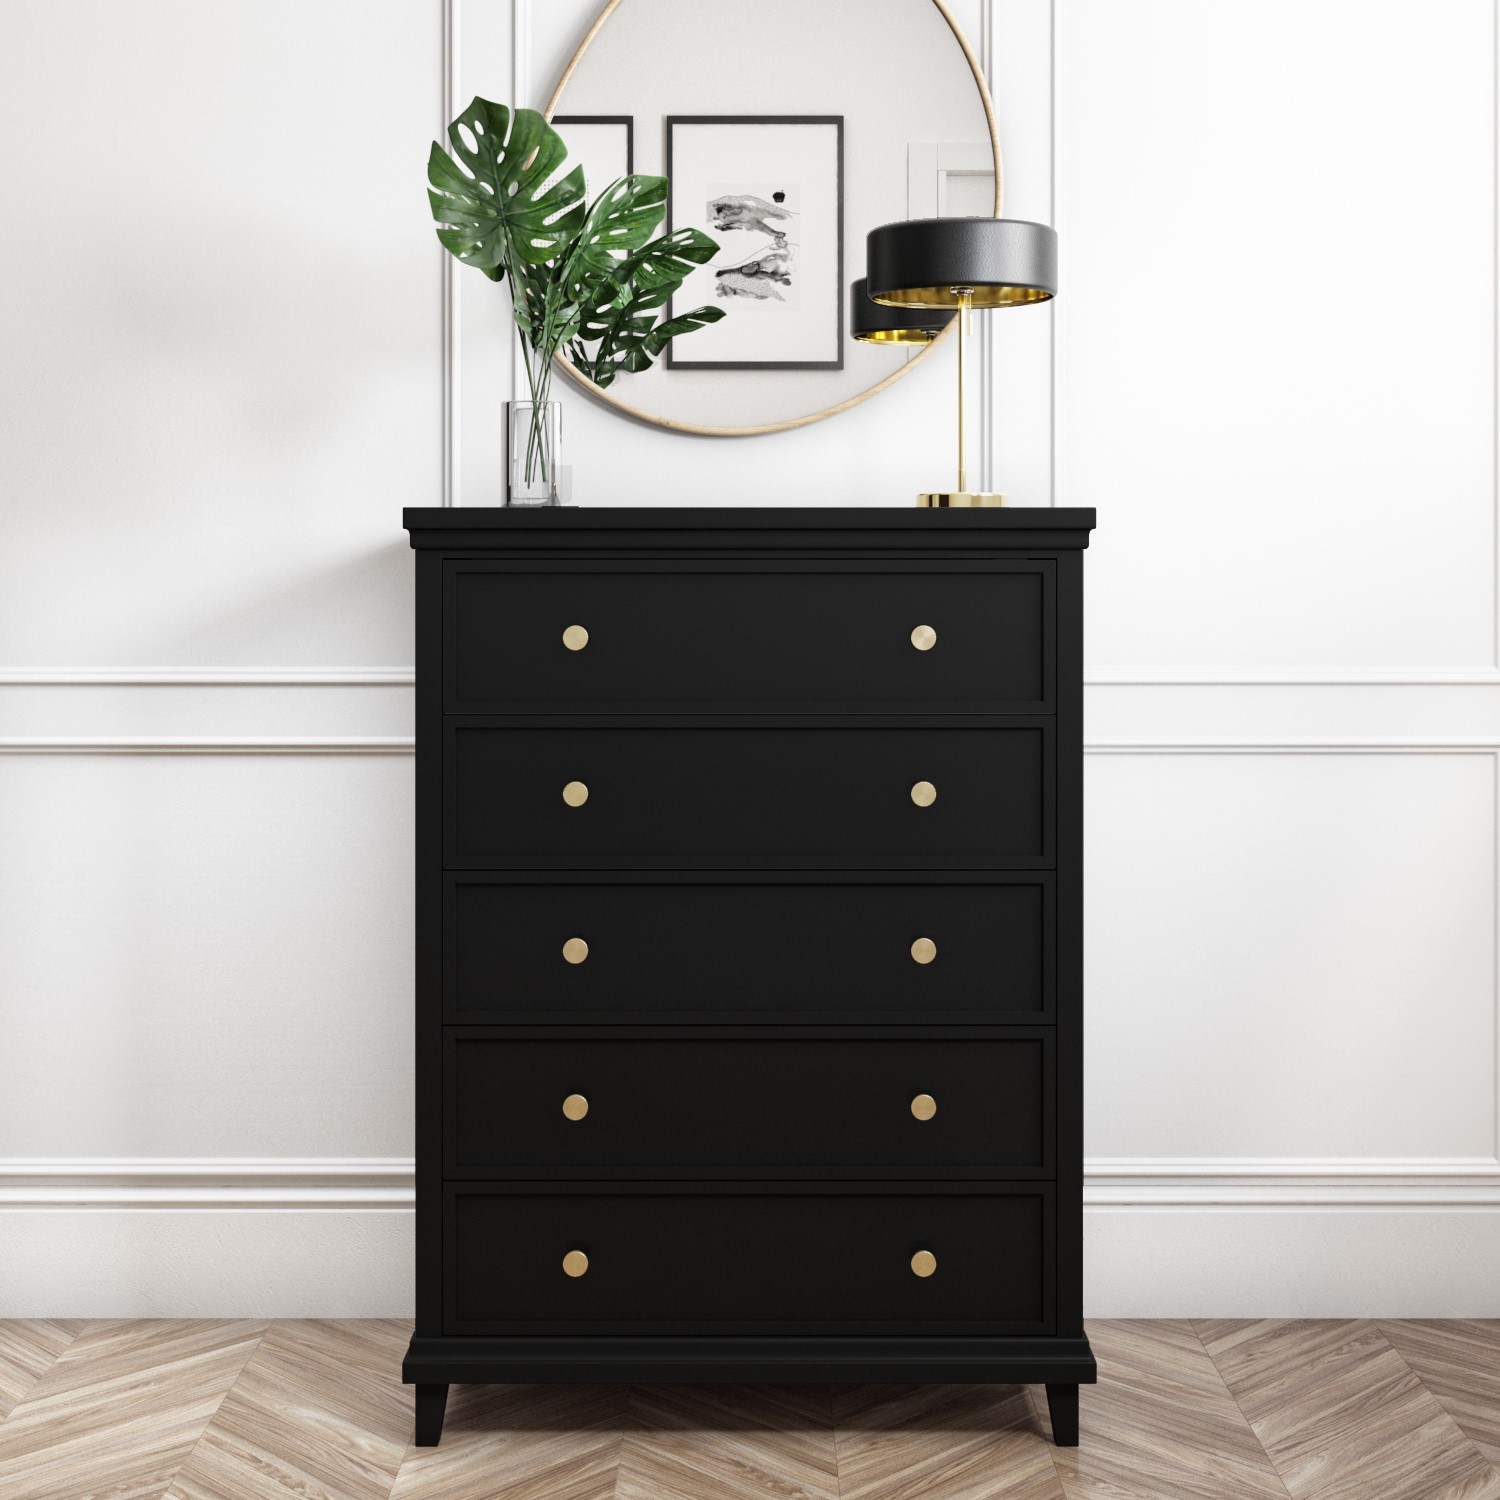 Photo of Tall black chest of 5 drawers - georgia